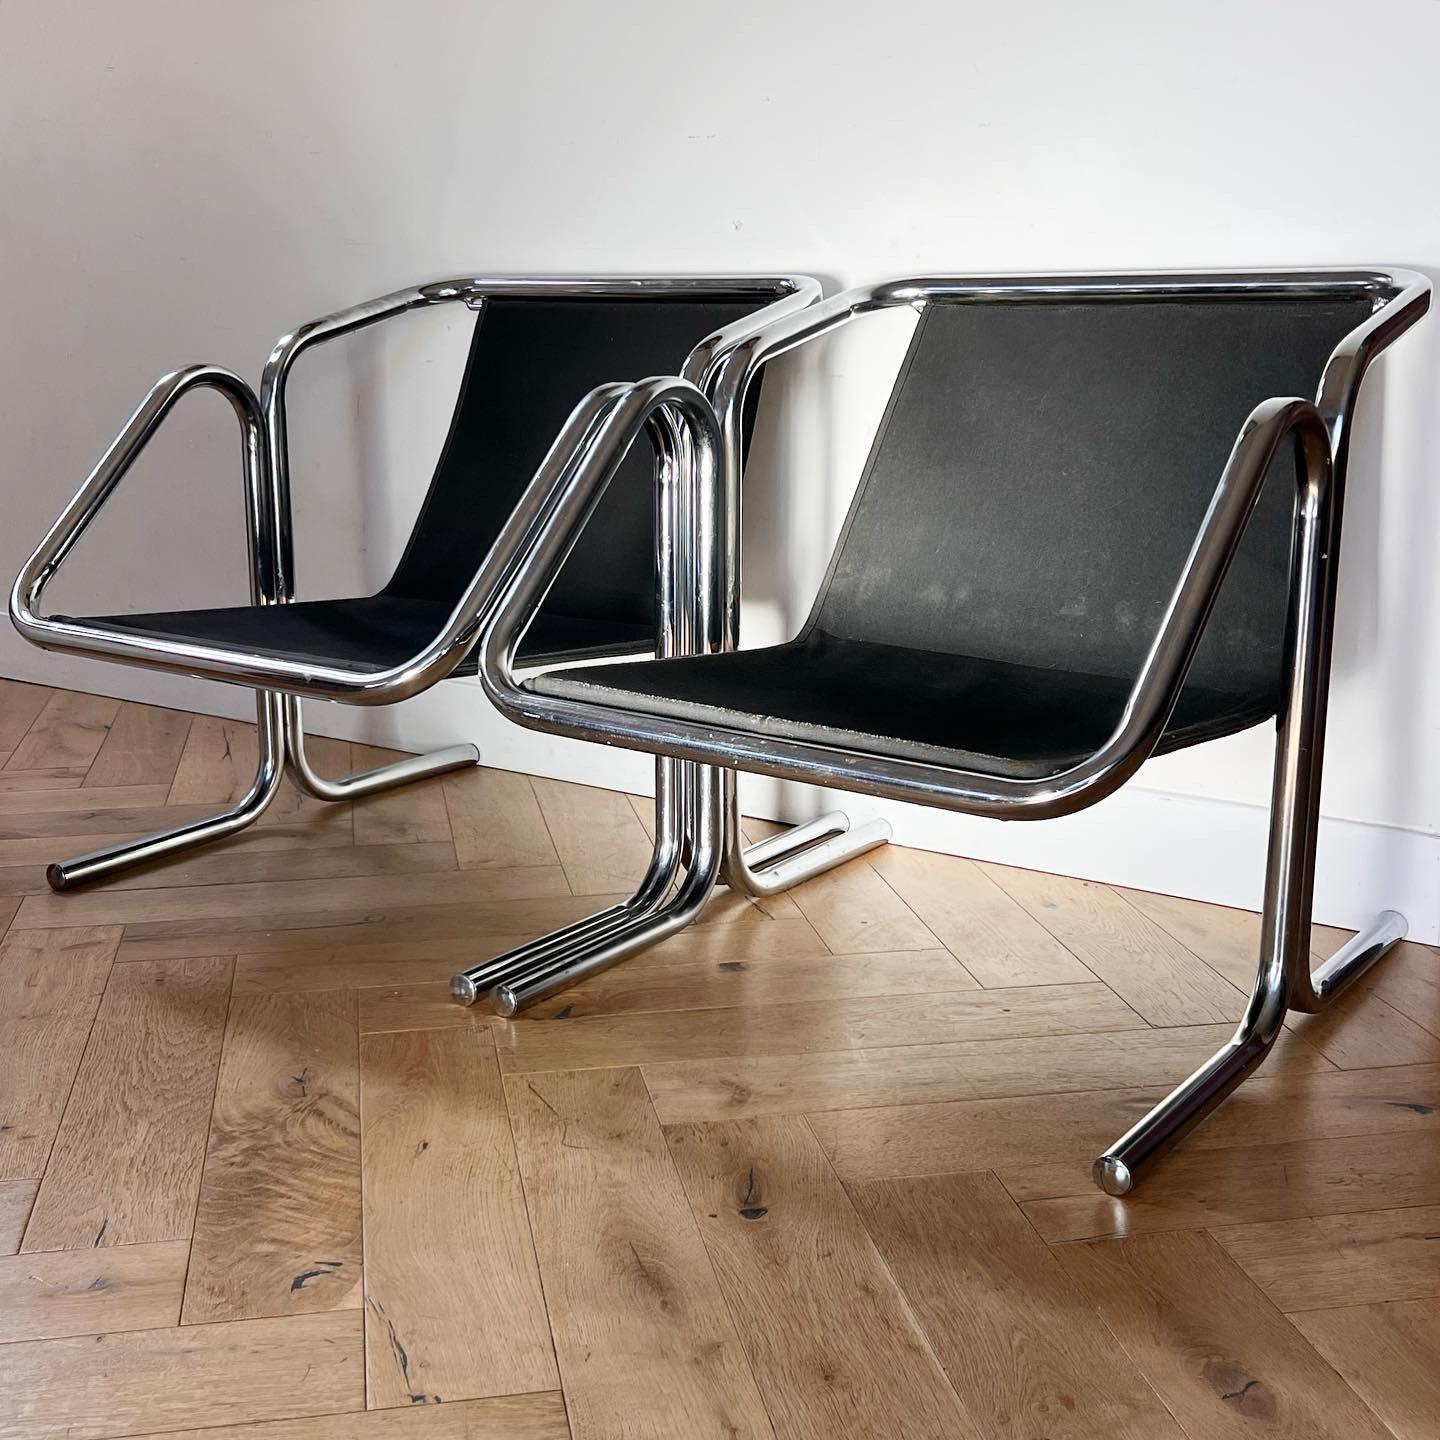 A pair of tubular chrome and canvas lounge chairs by Jerry Johnson, mid 1970s. Charcoal- hued canvas is slung over sleek and sexy tubular chrome frames. Minor signs of age but overall great condition. Pick up in Los Angeles or worldwide shipping